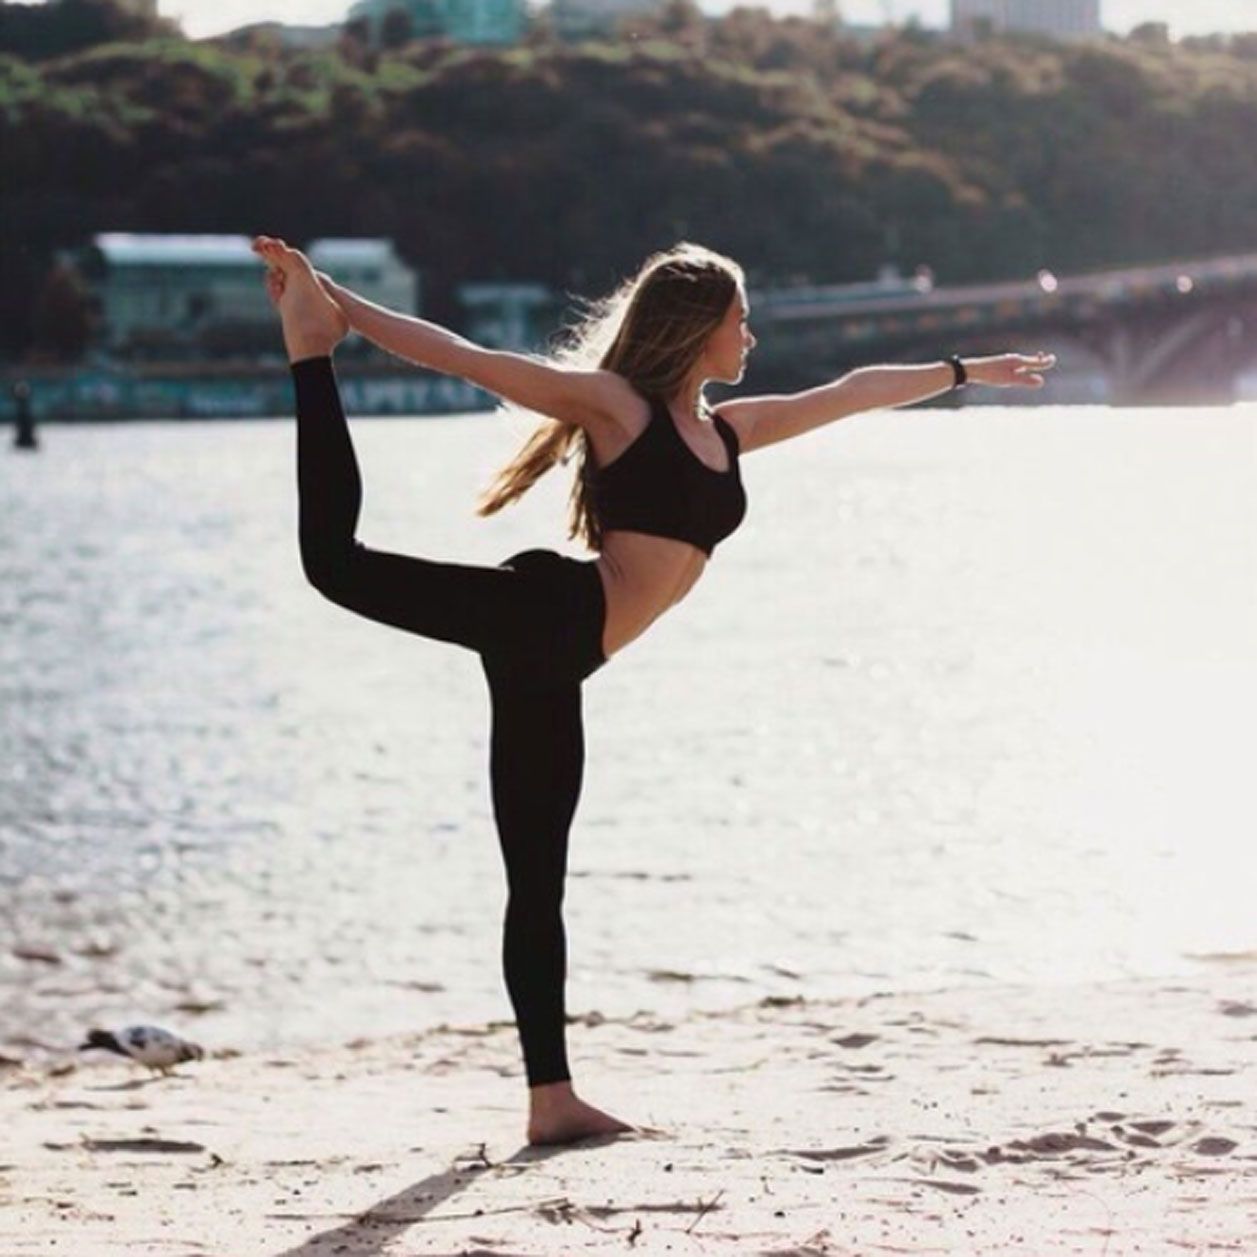 15 Yoga Quotes to Inspire Yogis on Their Journey | The Healthy